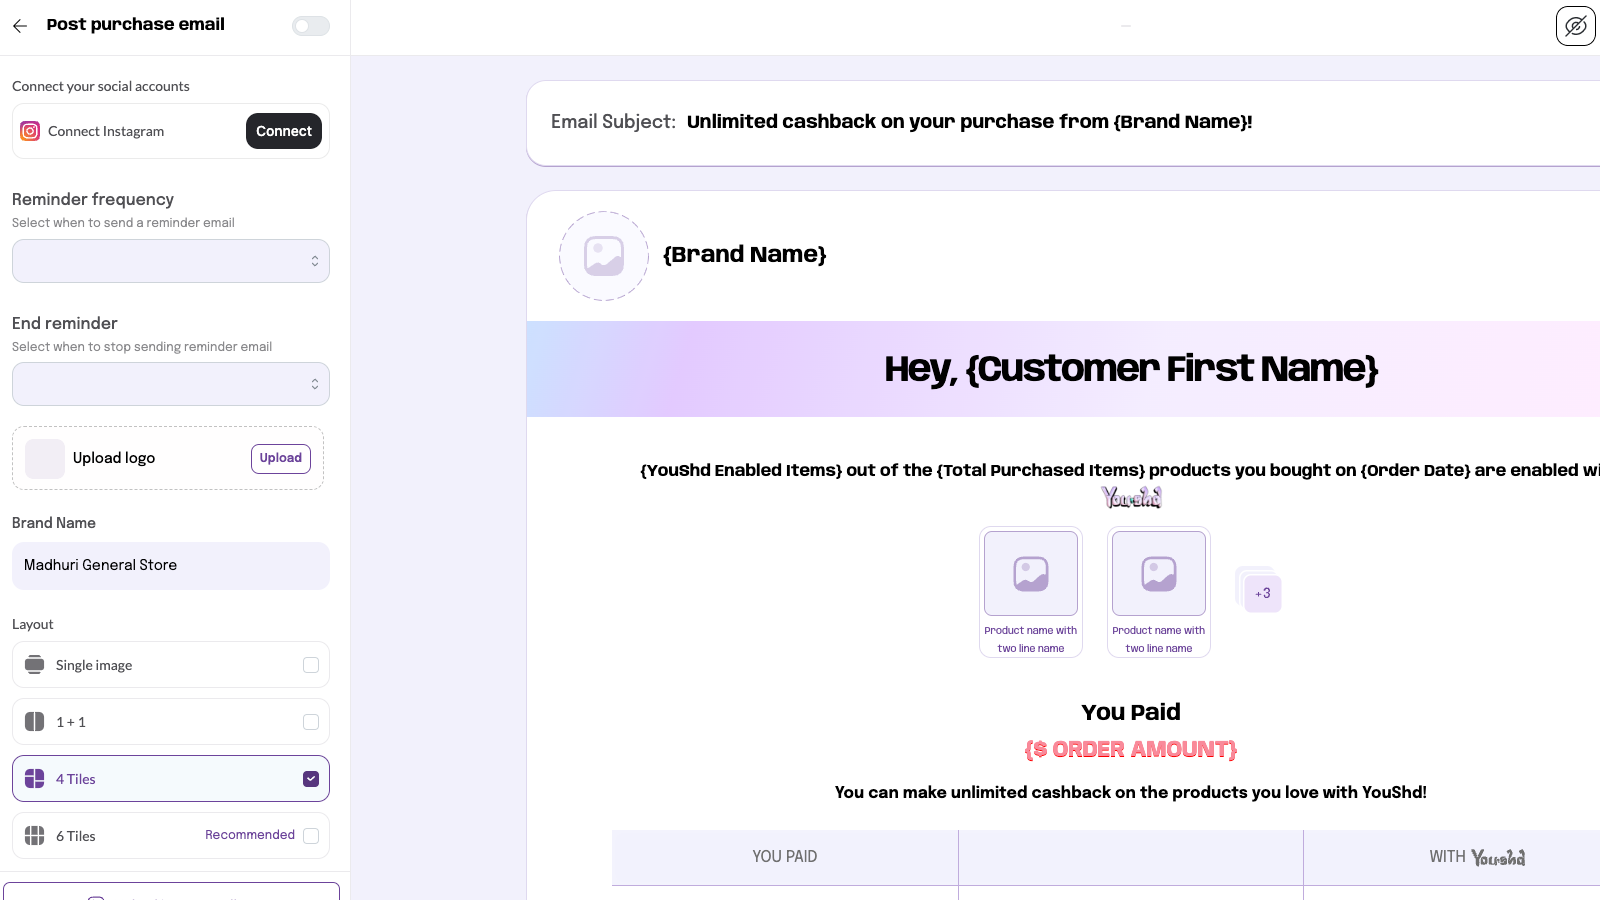 Send customised emails to different cohort